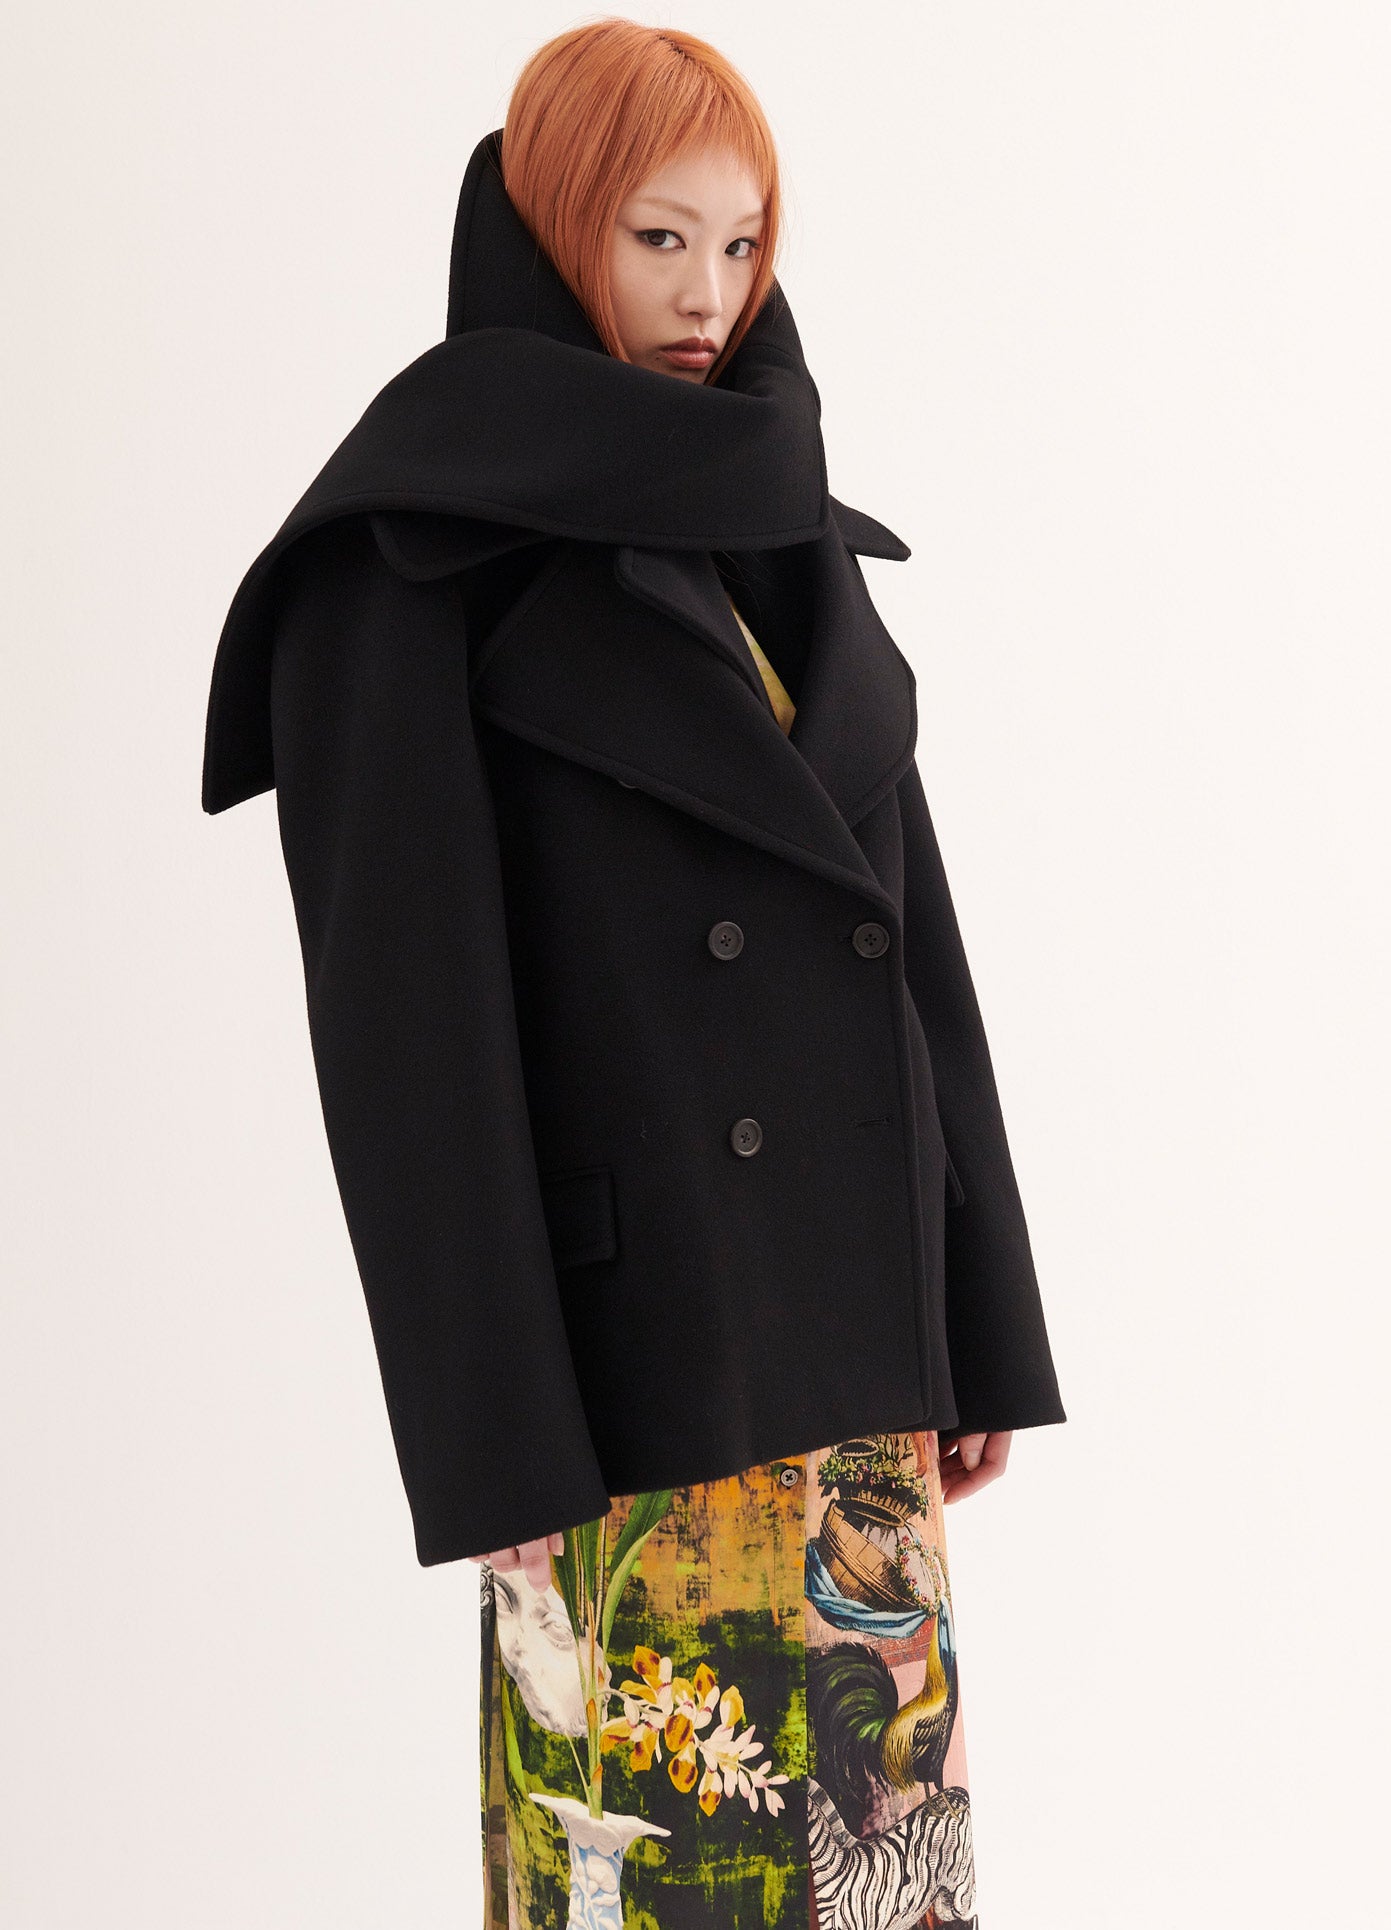 MONSE Double Collar Jacket in Black on Model Side View